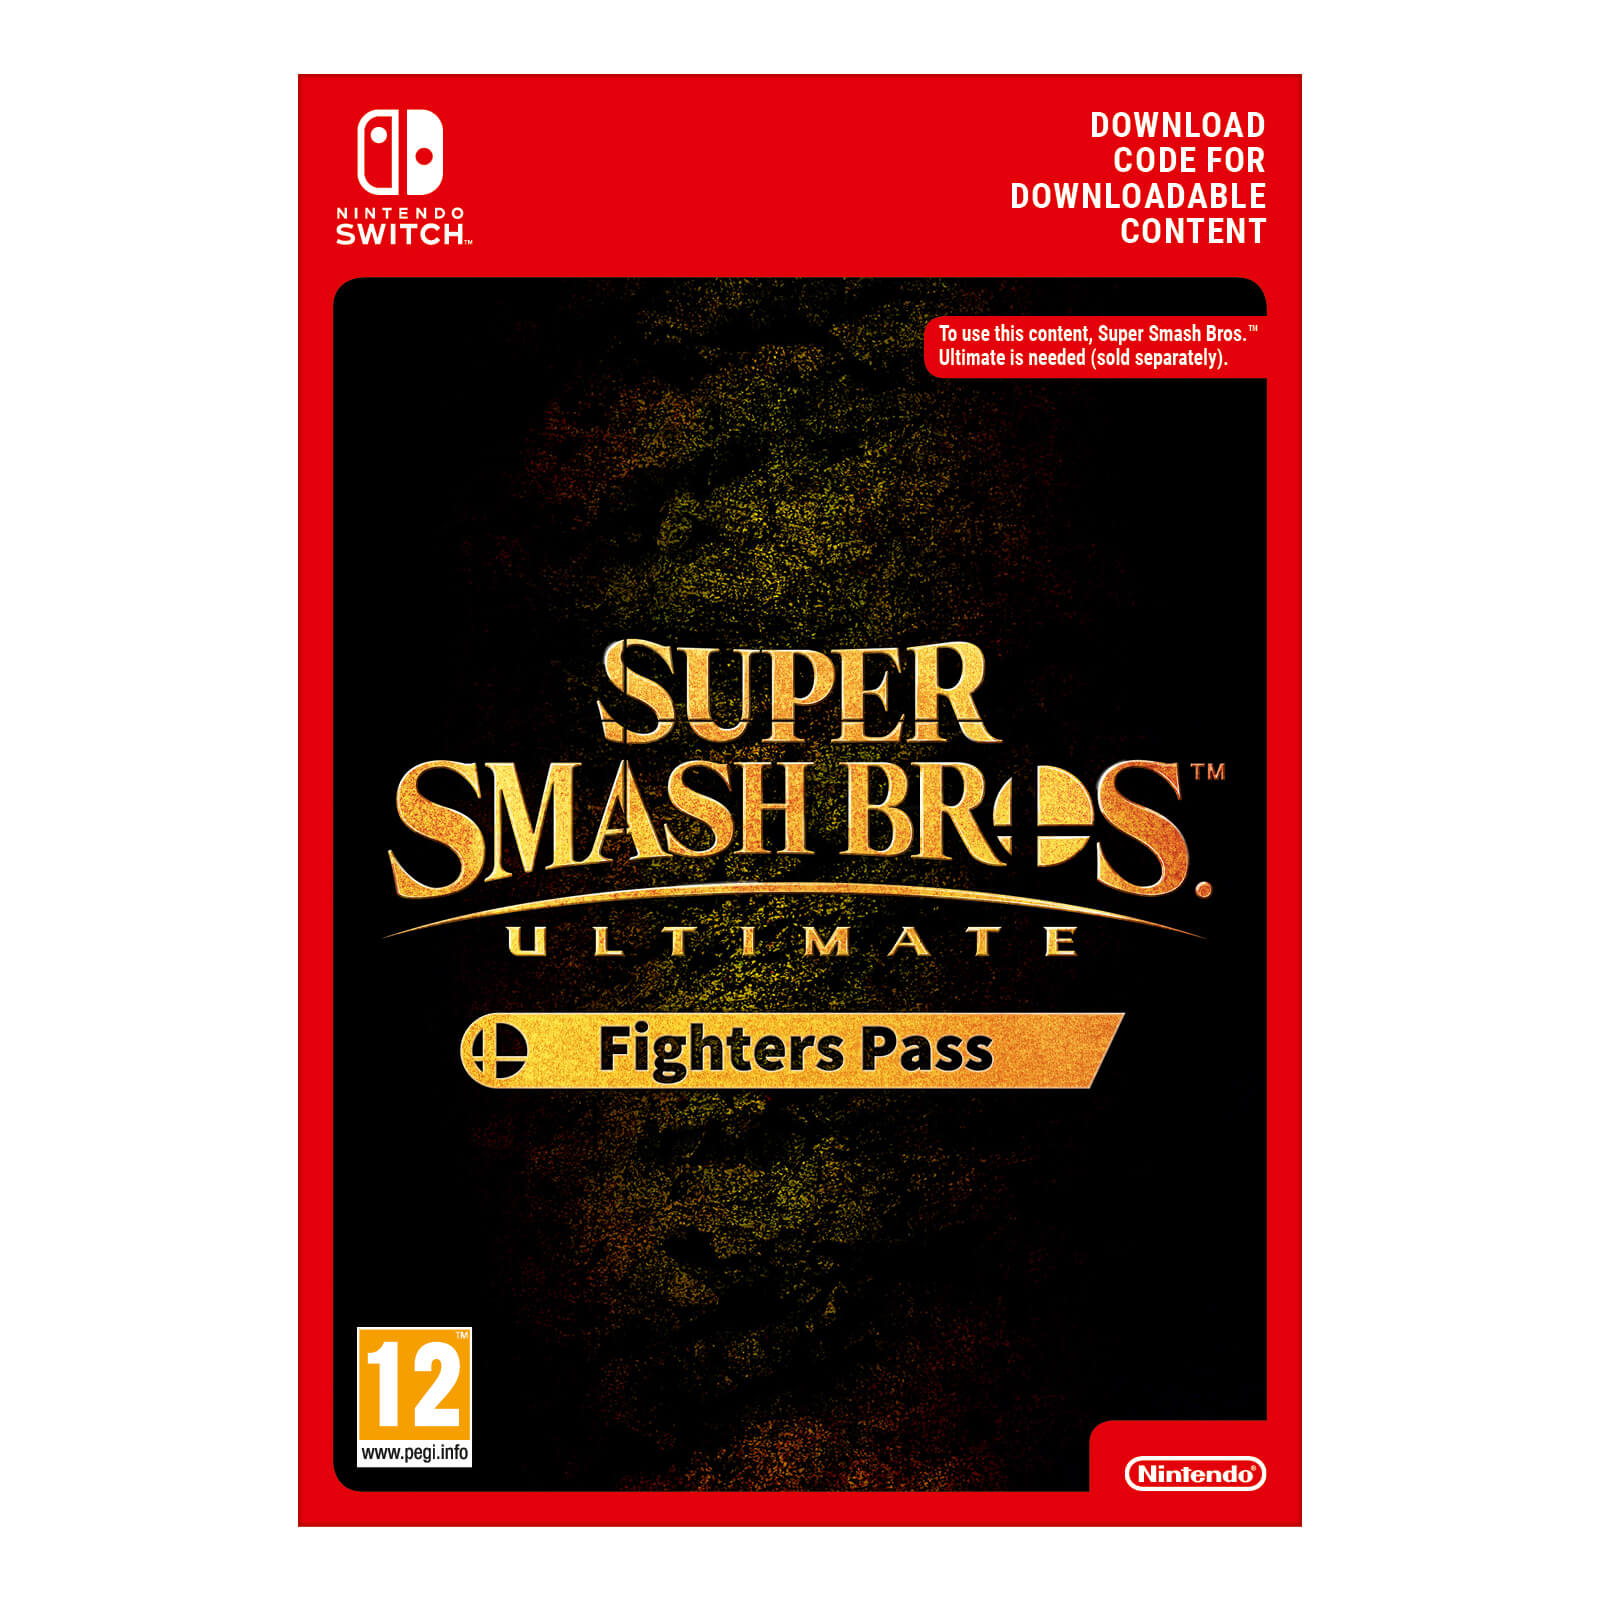 super smash bros ultimate fighter pass code